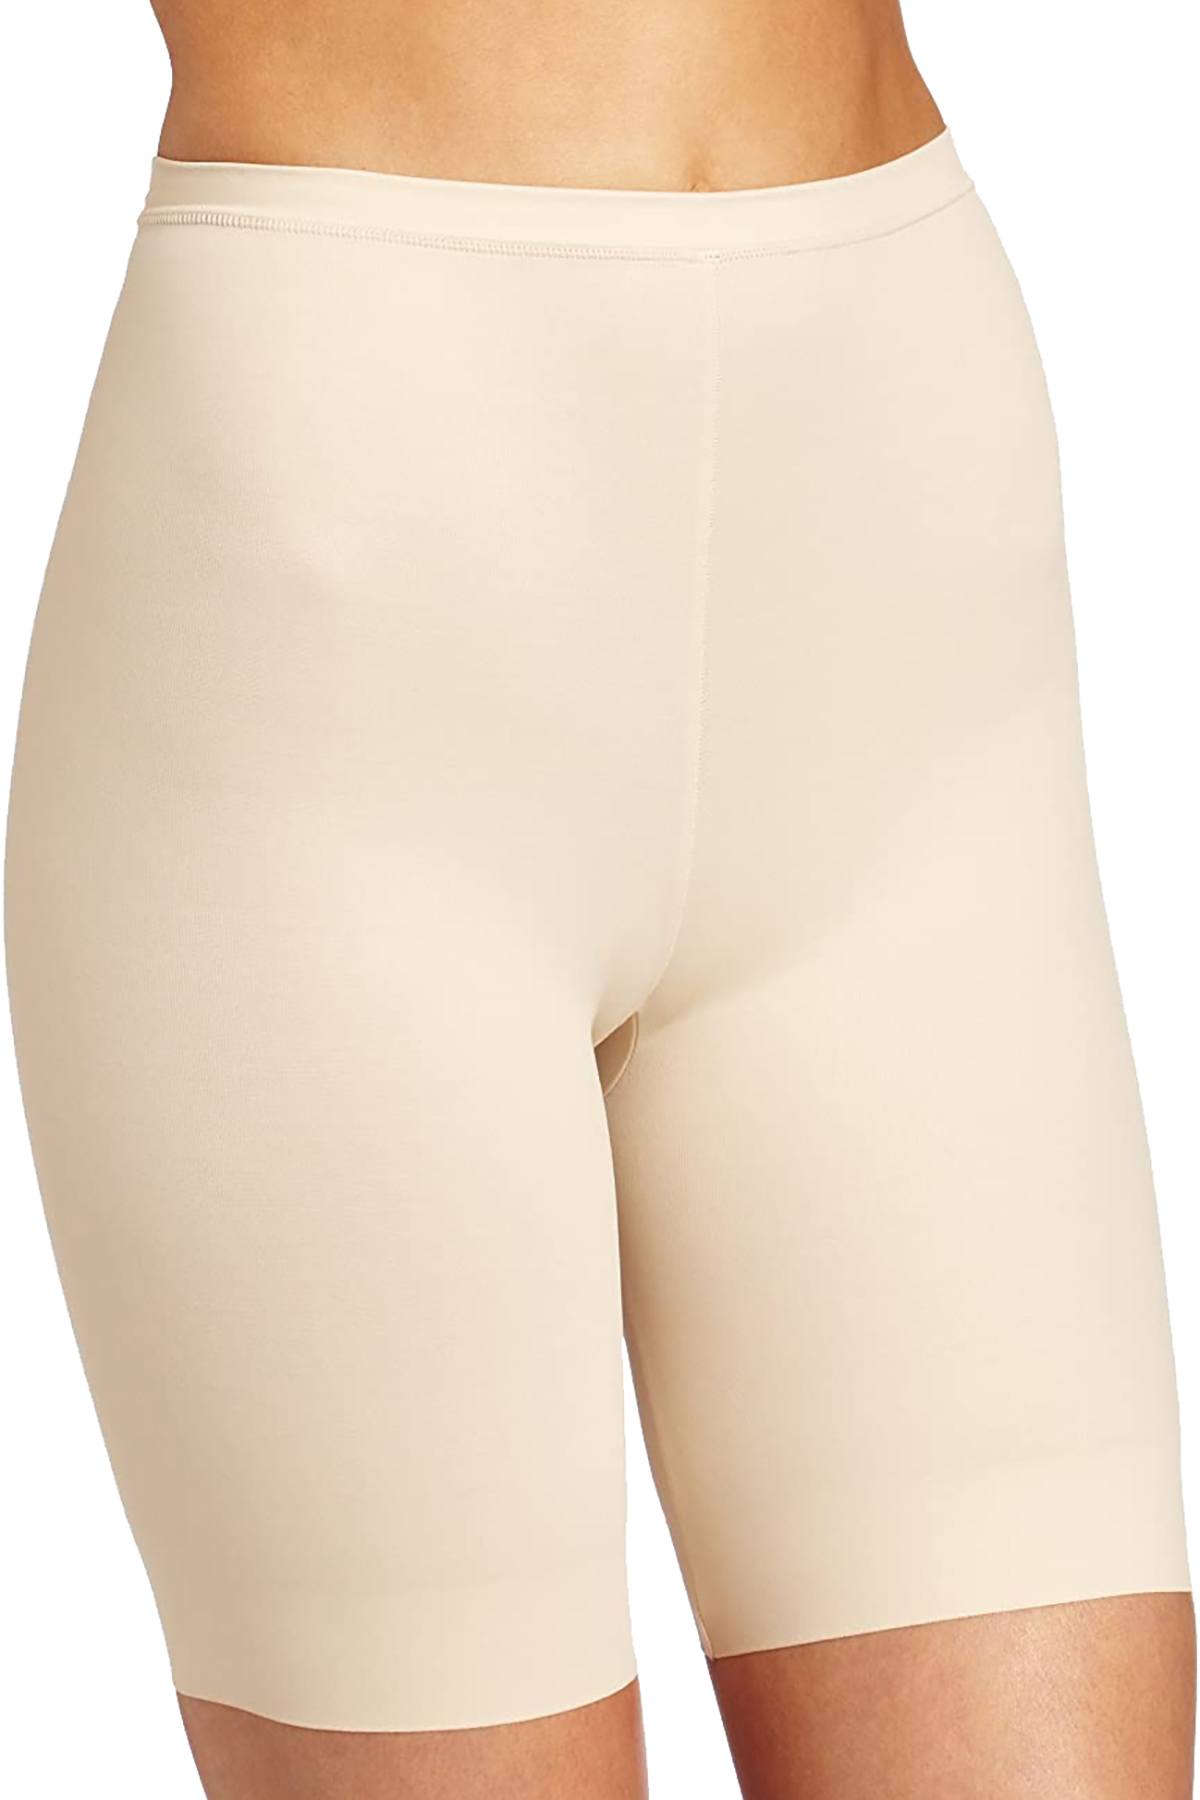 Maidenform Flexees Adjusts To Me Thigh Slimmer in Ivory Nude